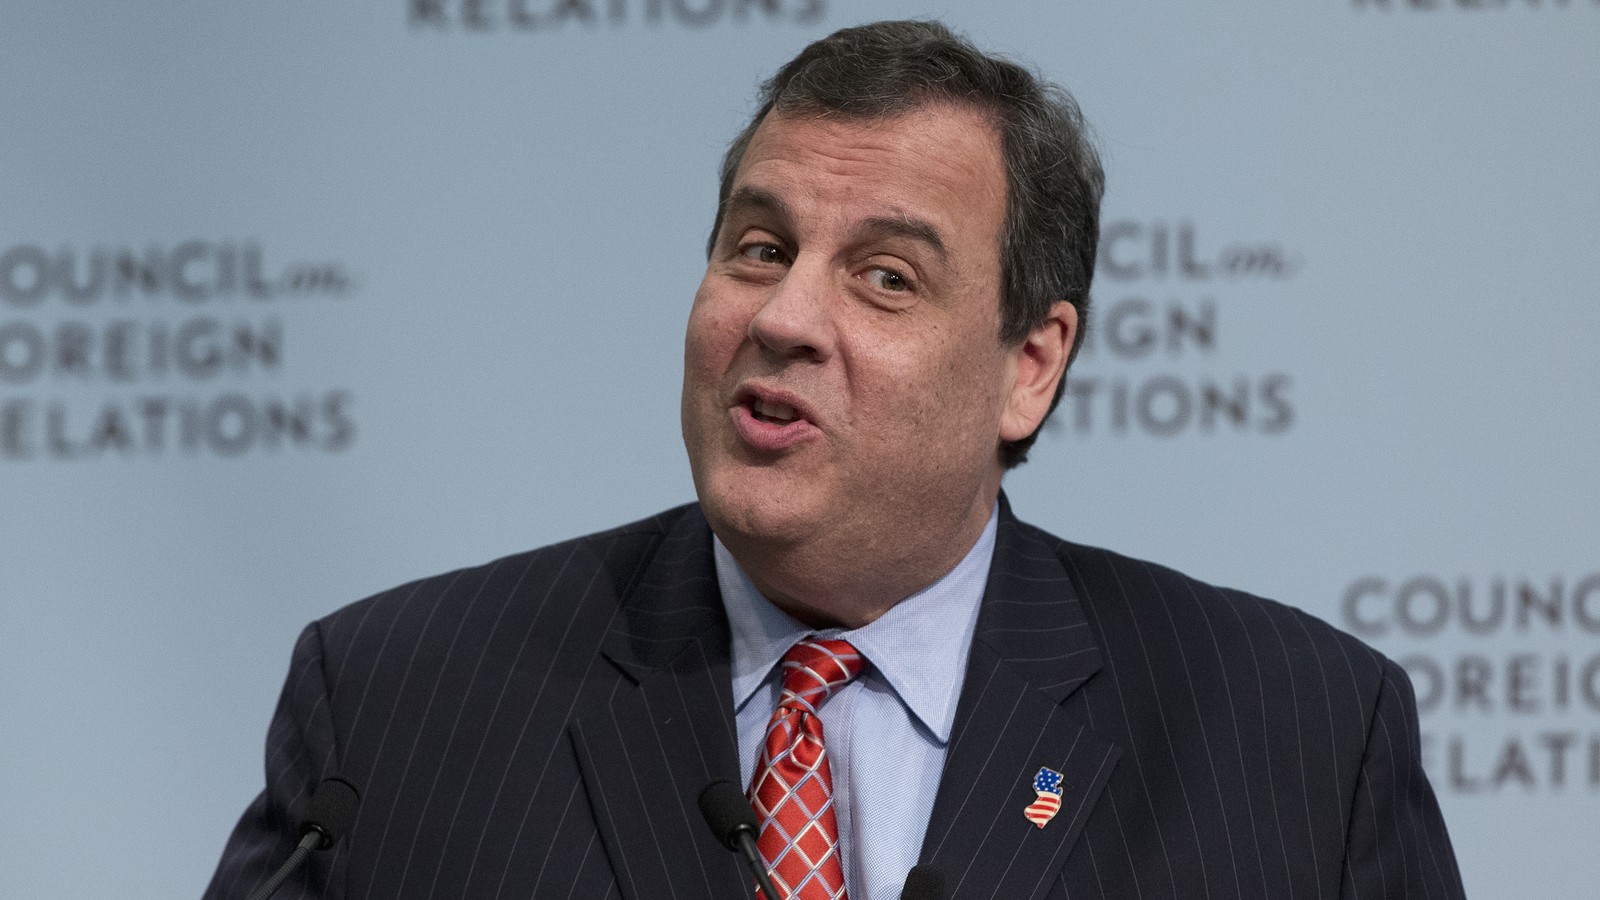 Chris Christie On Isis, Iran, Syria, And Foreign Policy - The Atlantic